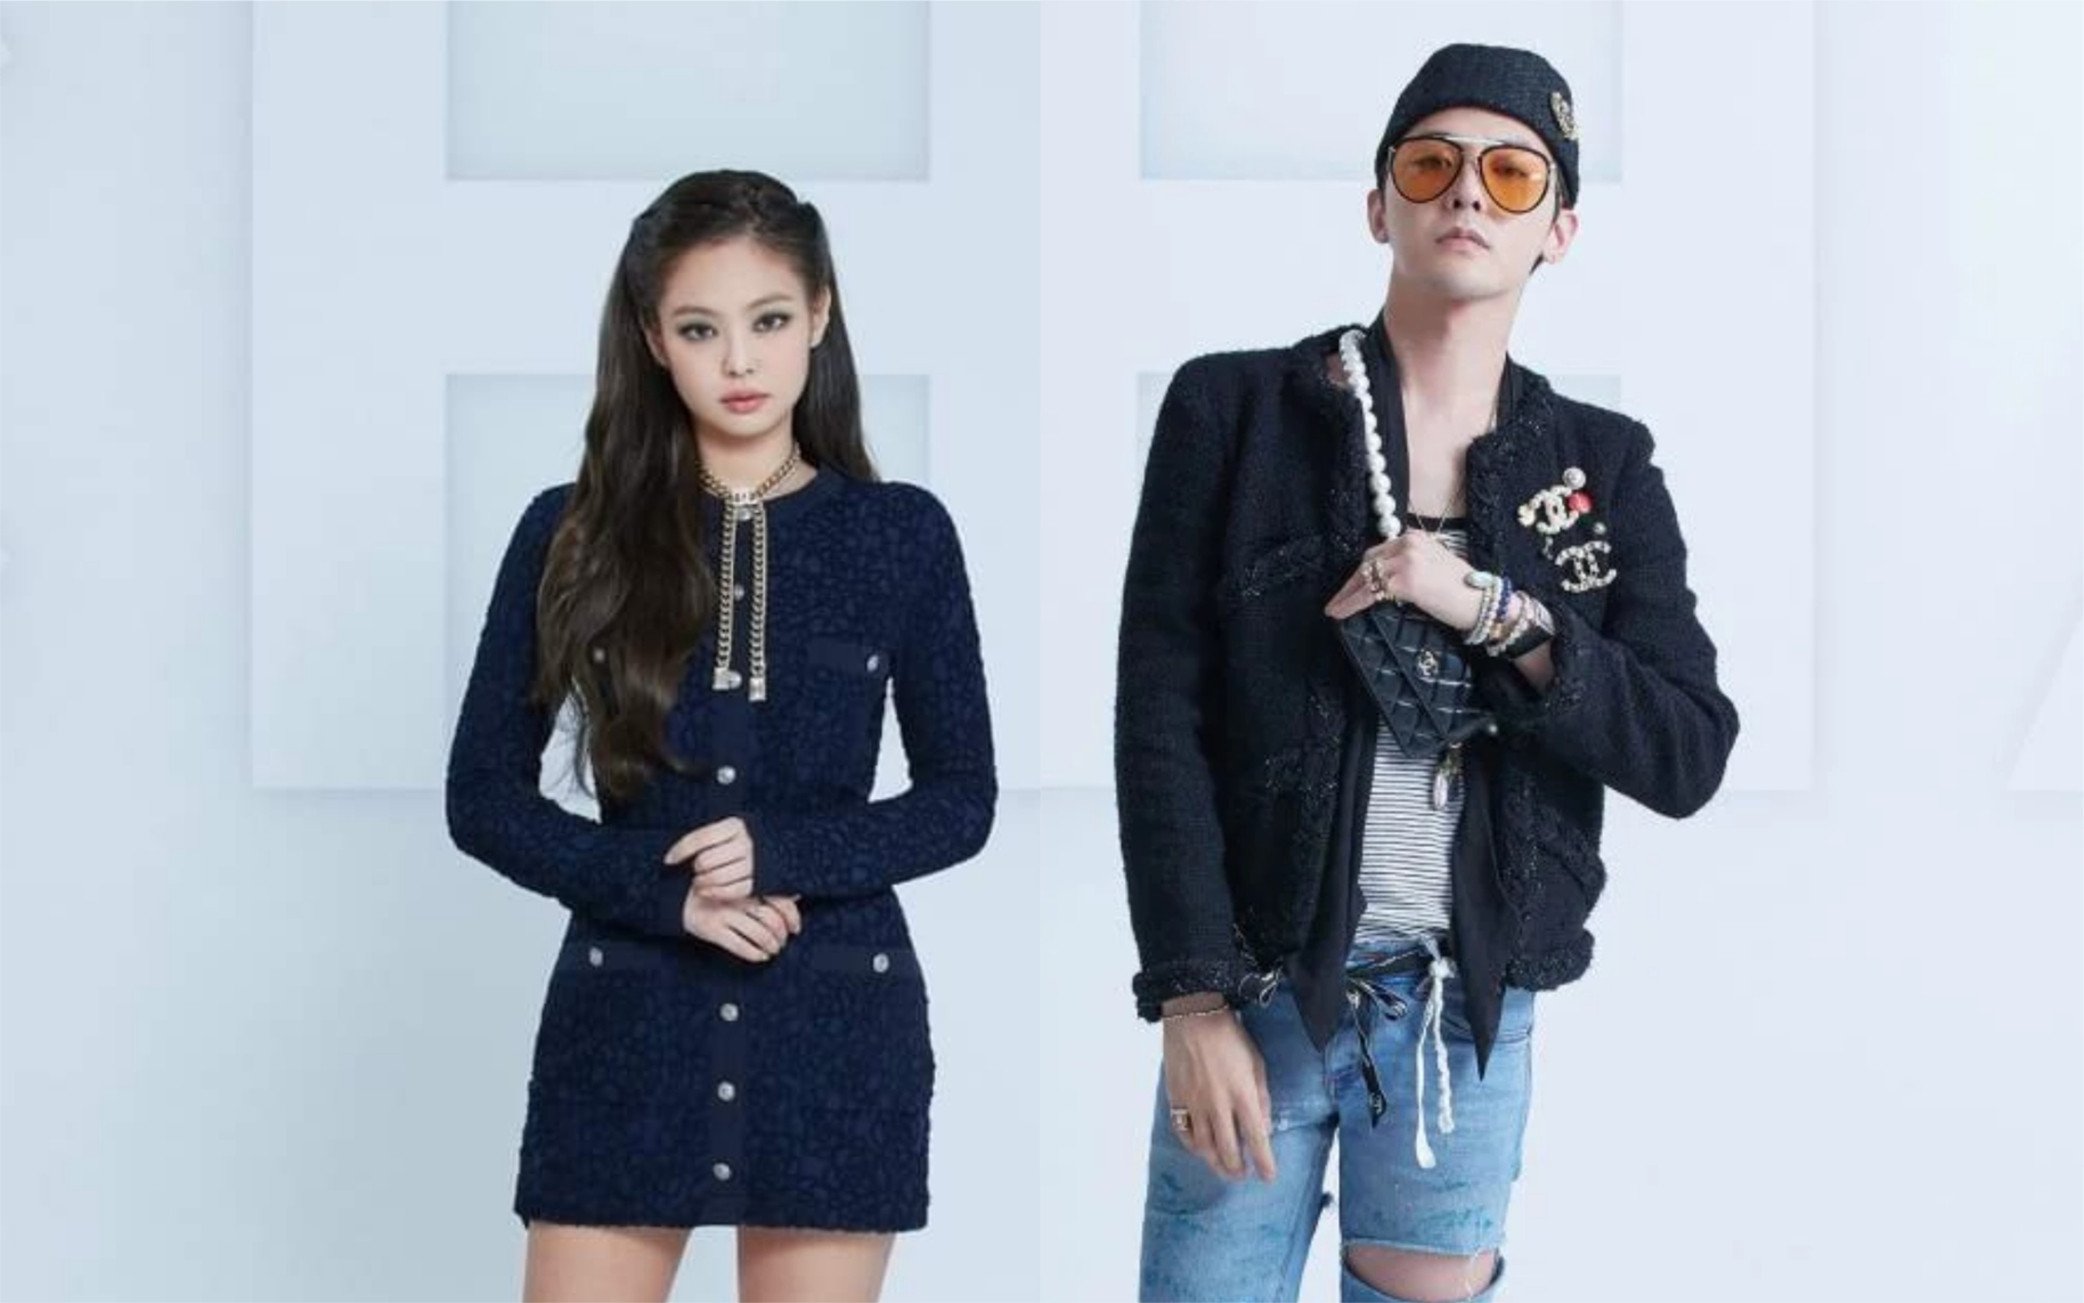 Jennie and G-Dragon are both Chanel ambassadors ... and romantic partners? Photo: Chanel